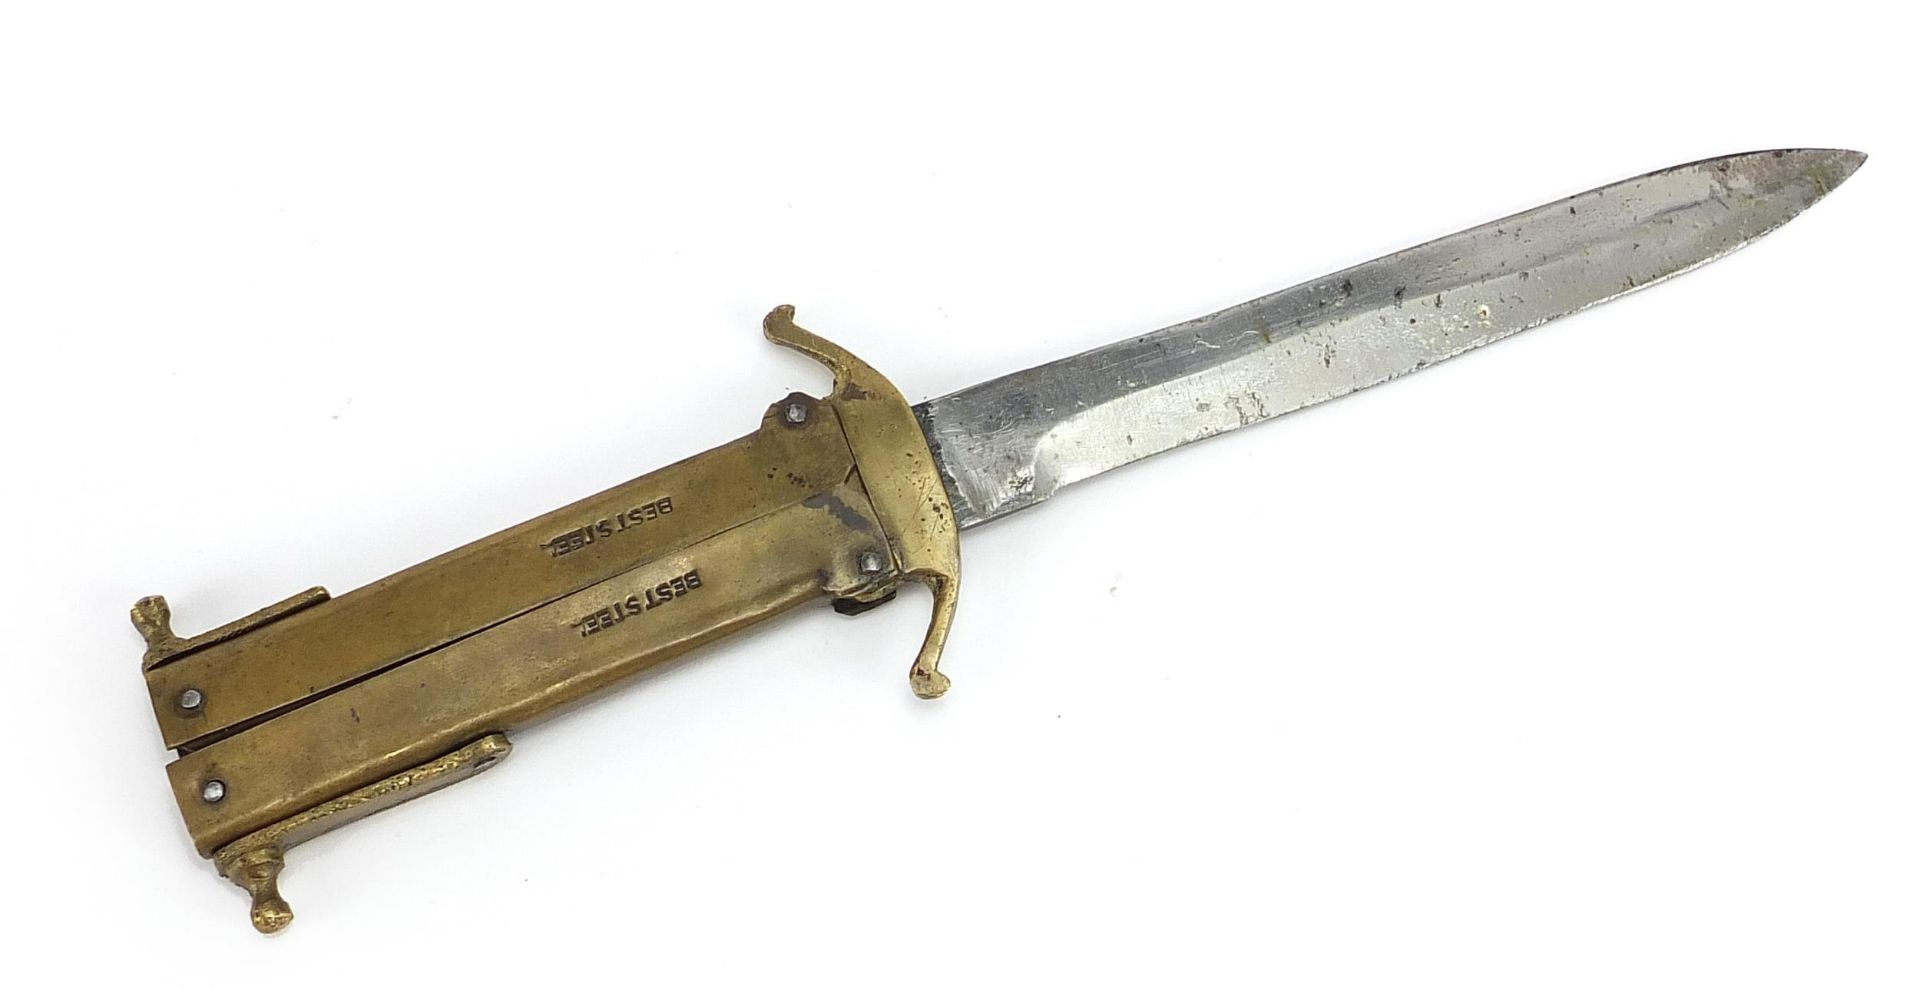 Military interest steel bladed folding knife with brass handle, 24.5cm in length when open